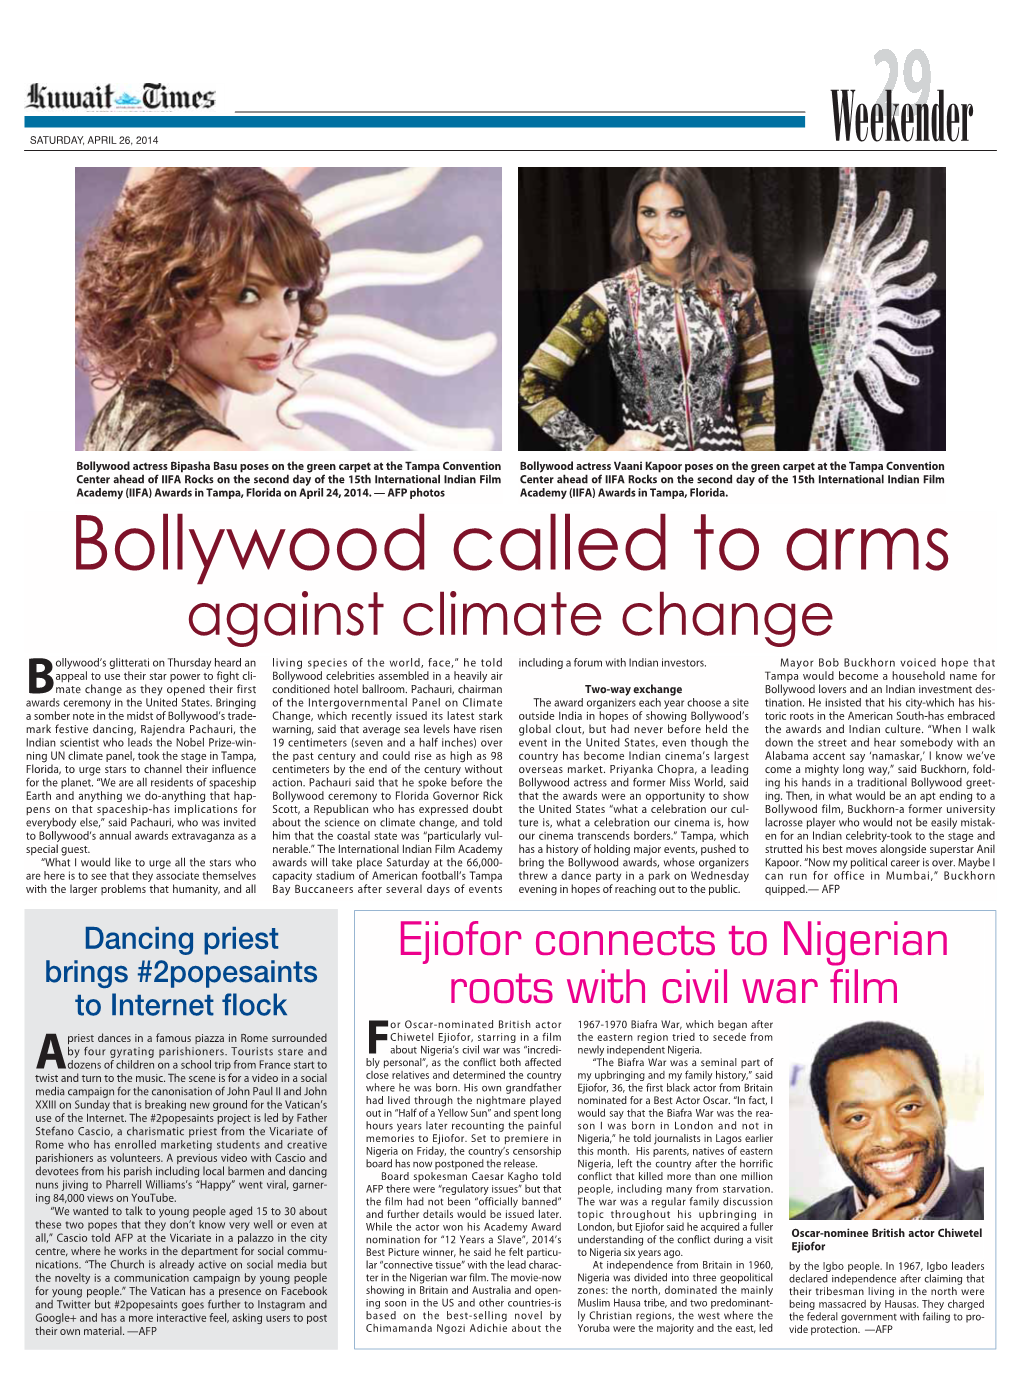 Bollywood Called to Arms